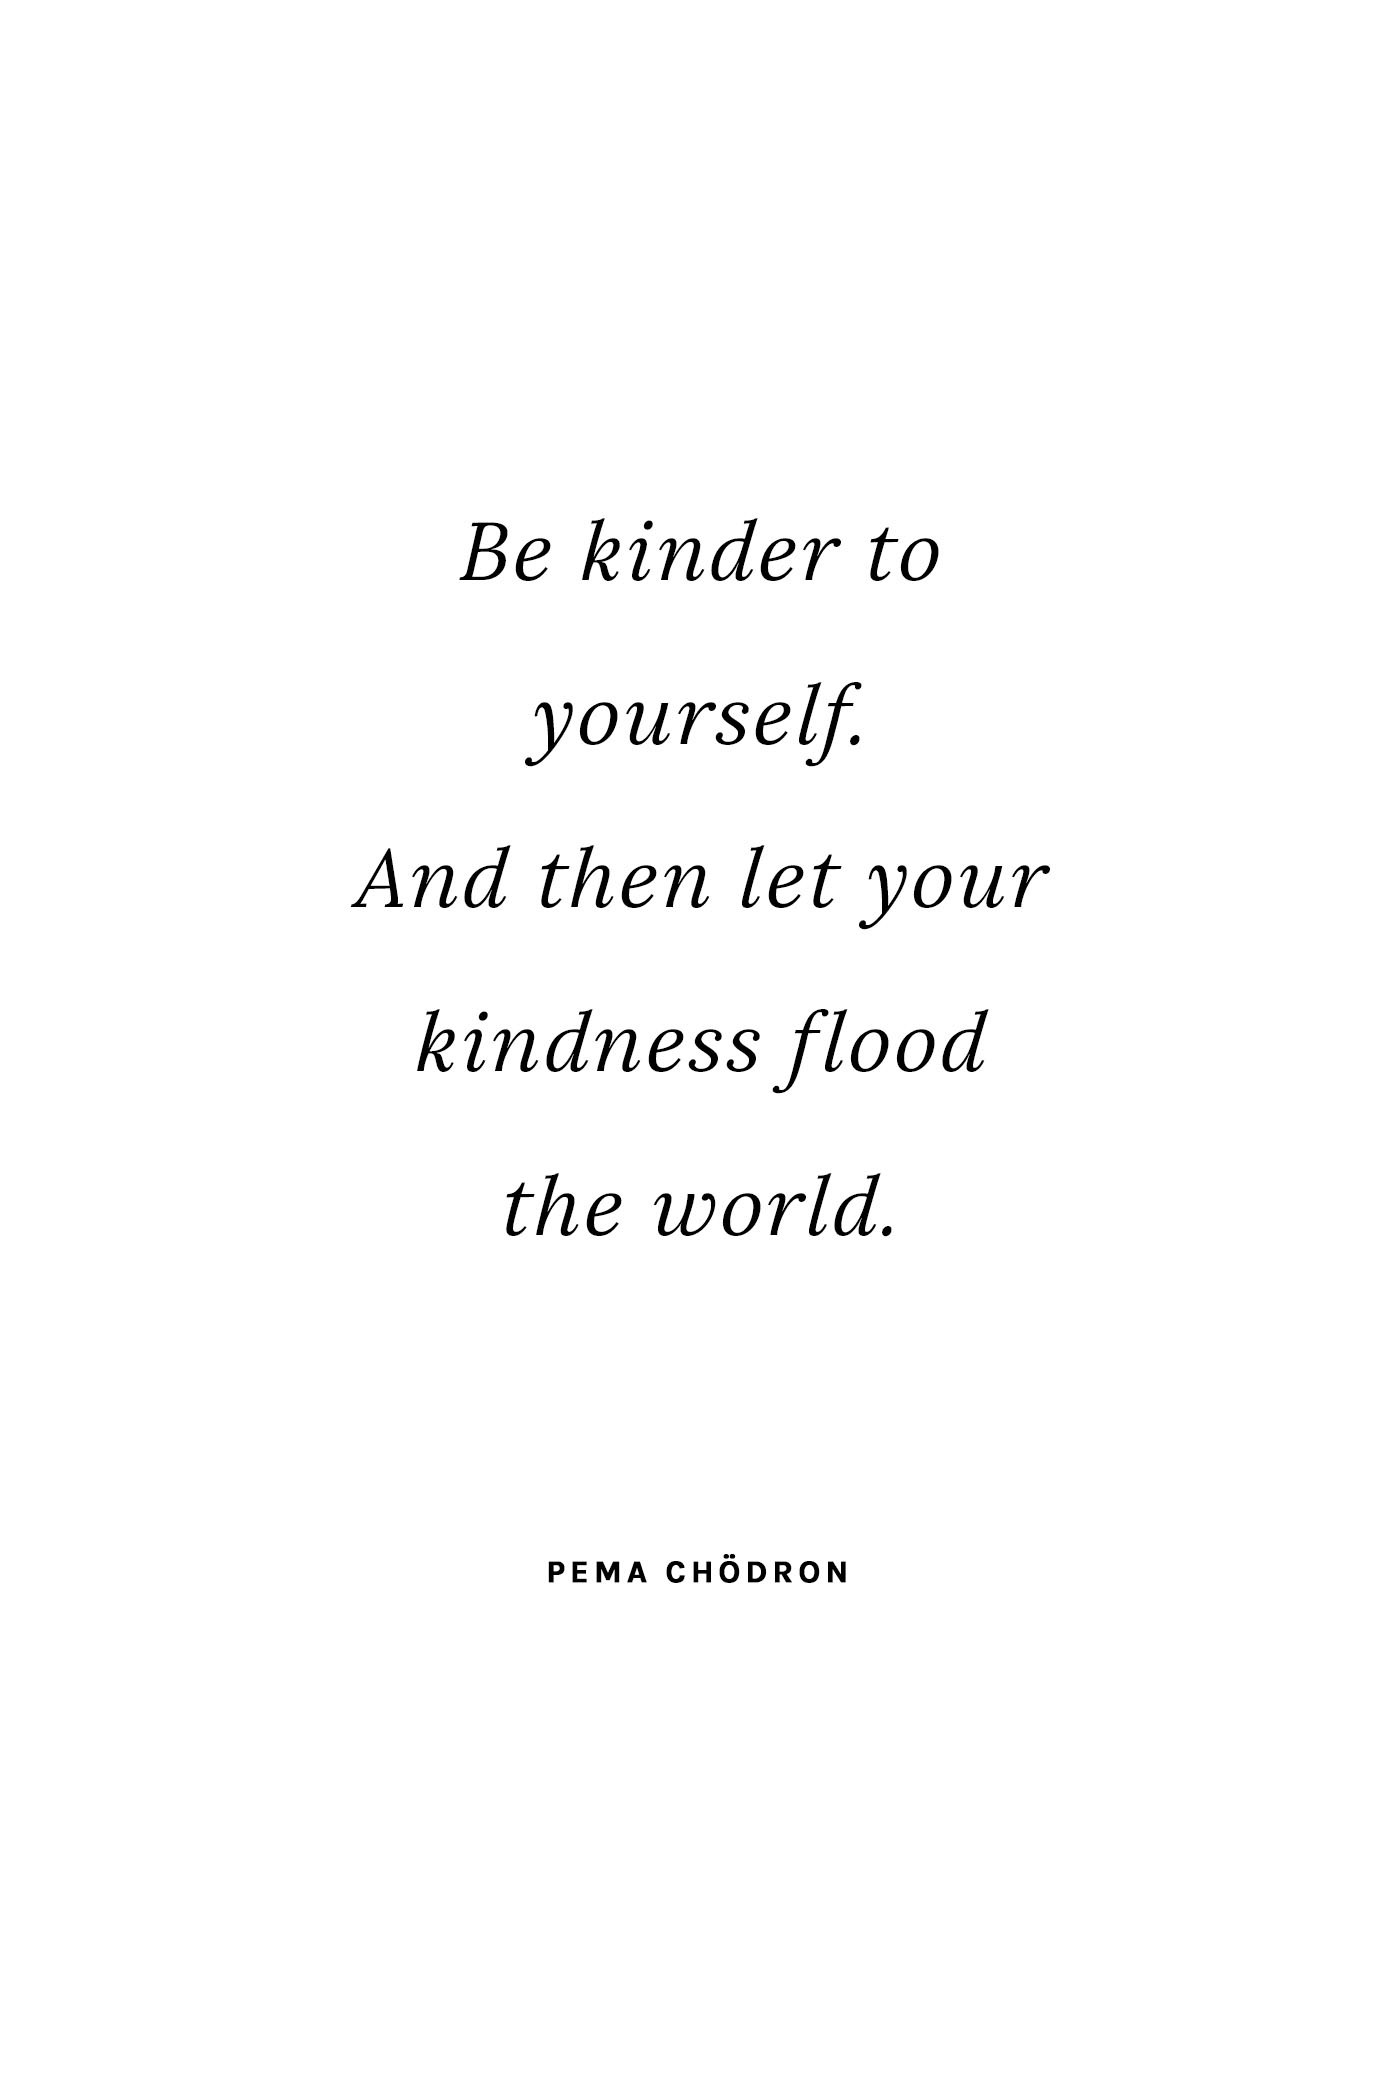 "Be kinder to yourself. And then let your kindness flood the world." - Pema Chödron - 5 Inspiring Quotes for a Positive Lifestyle on Hej Doll